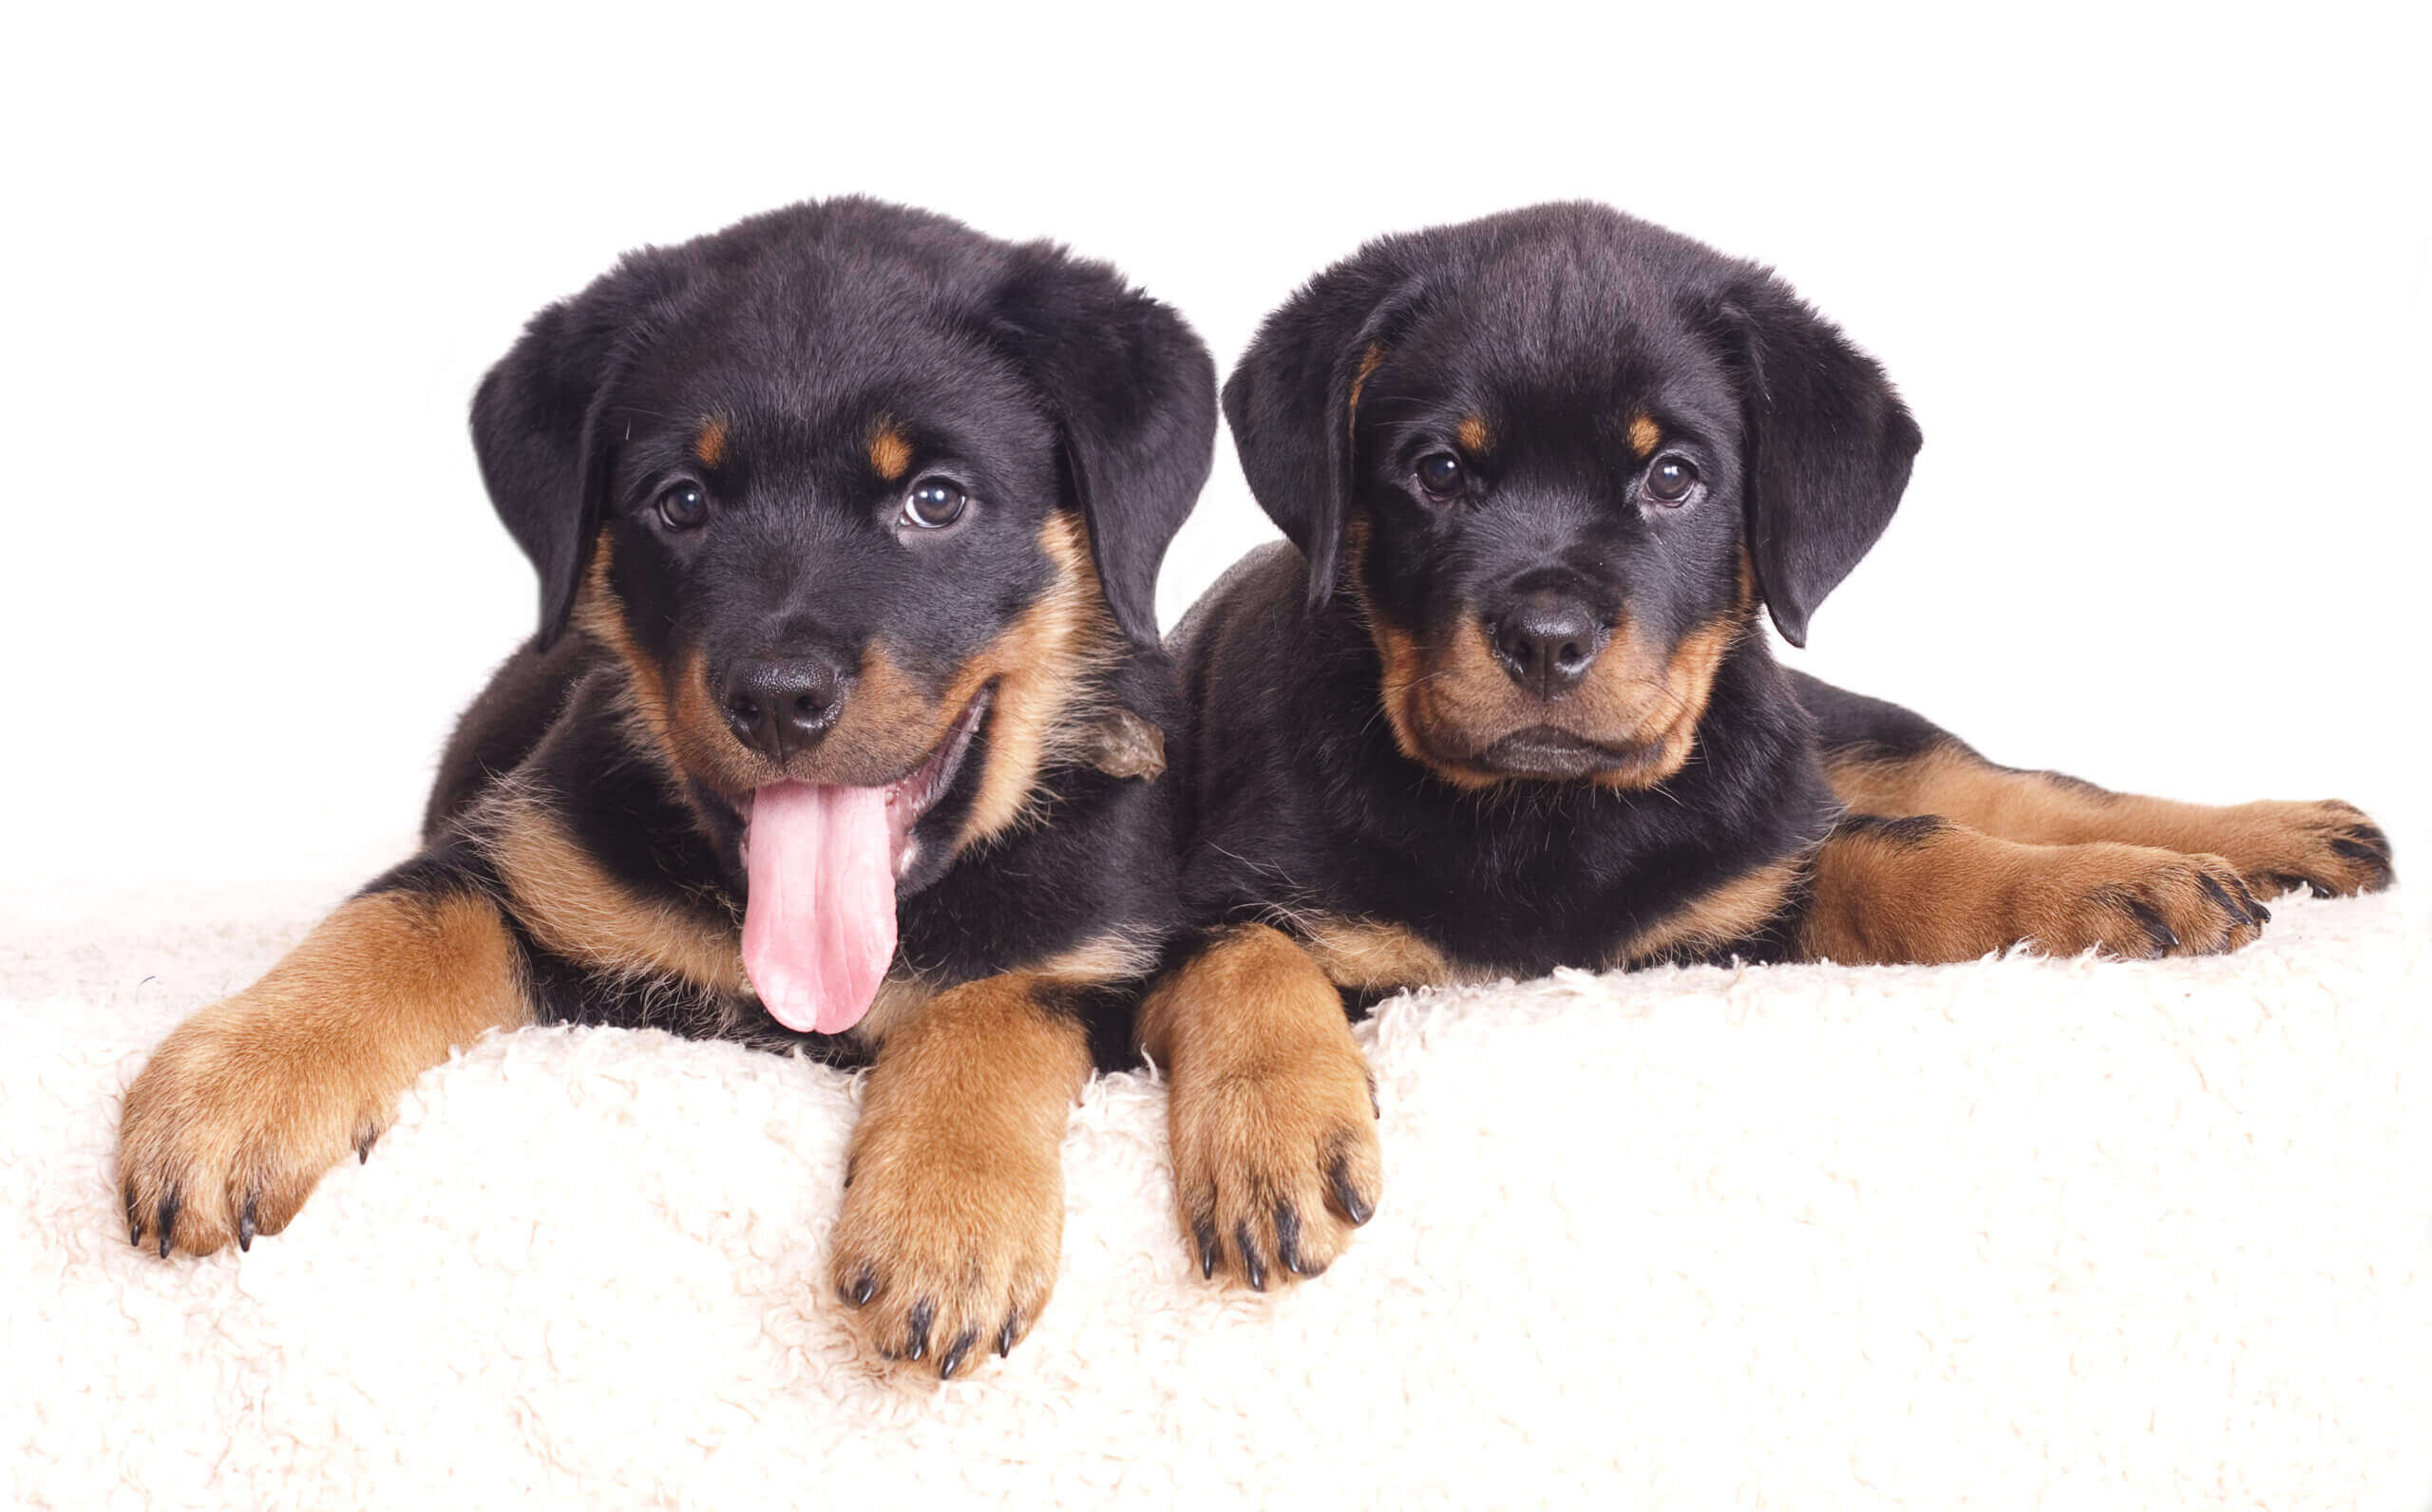 Two rottweiler puppies